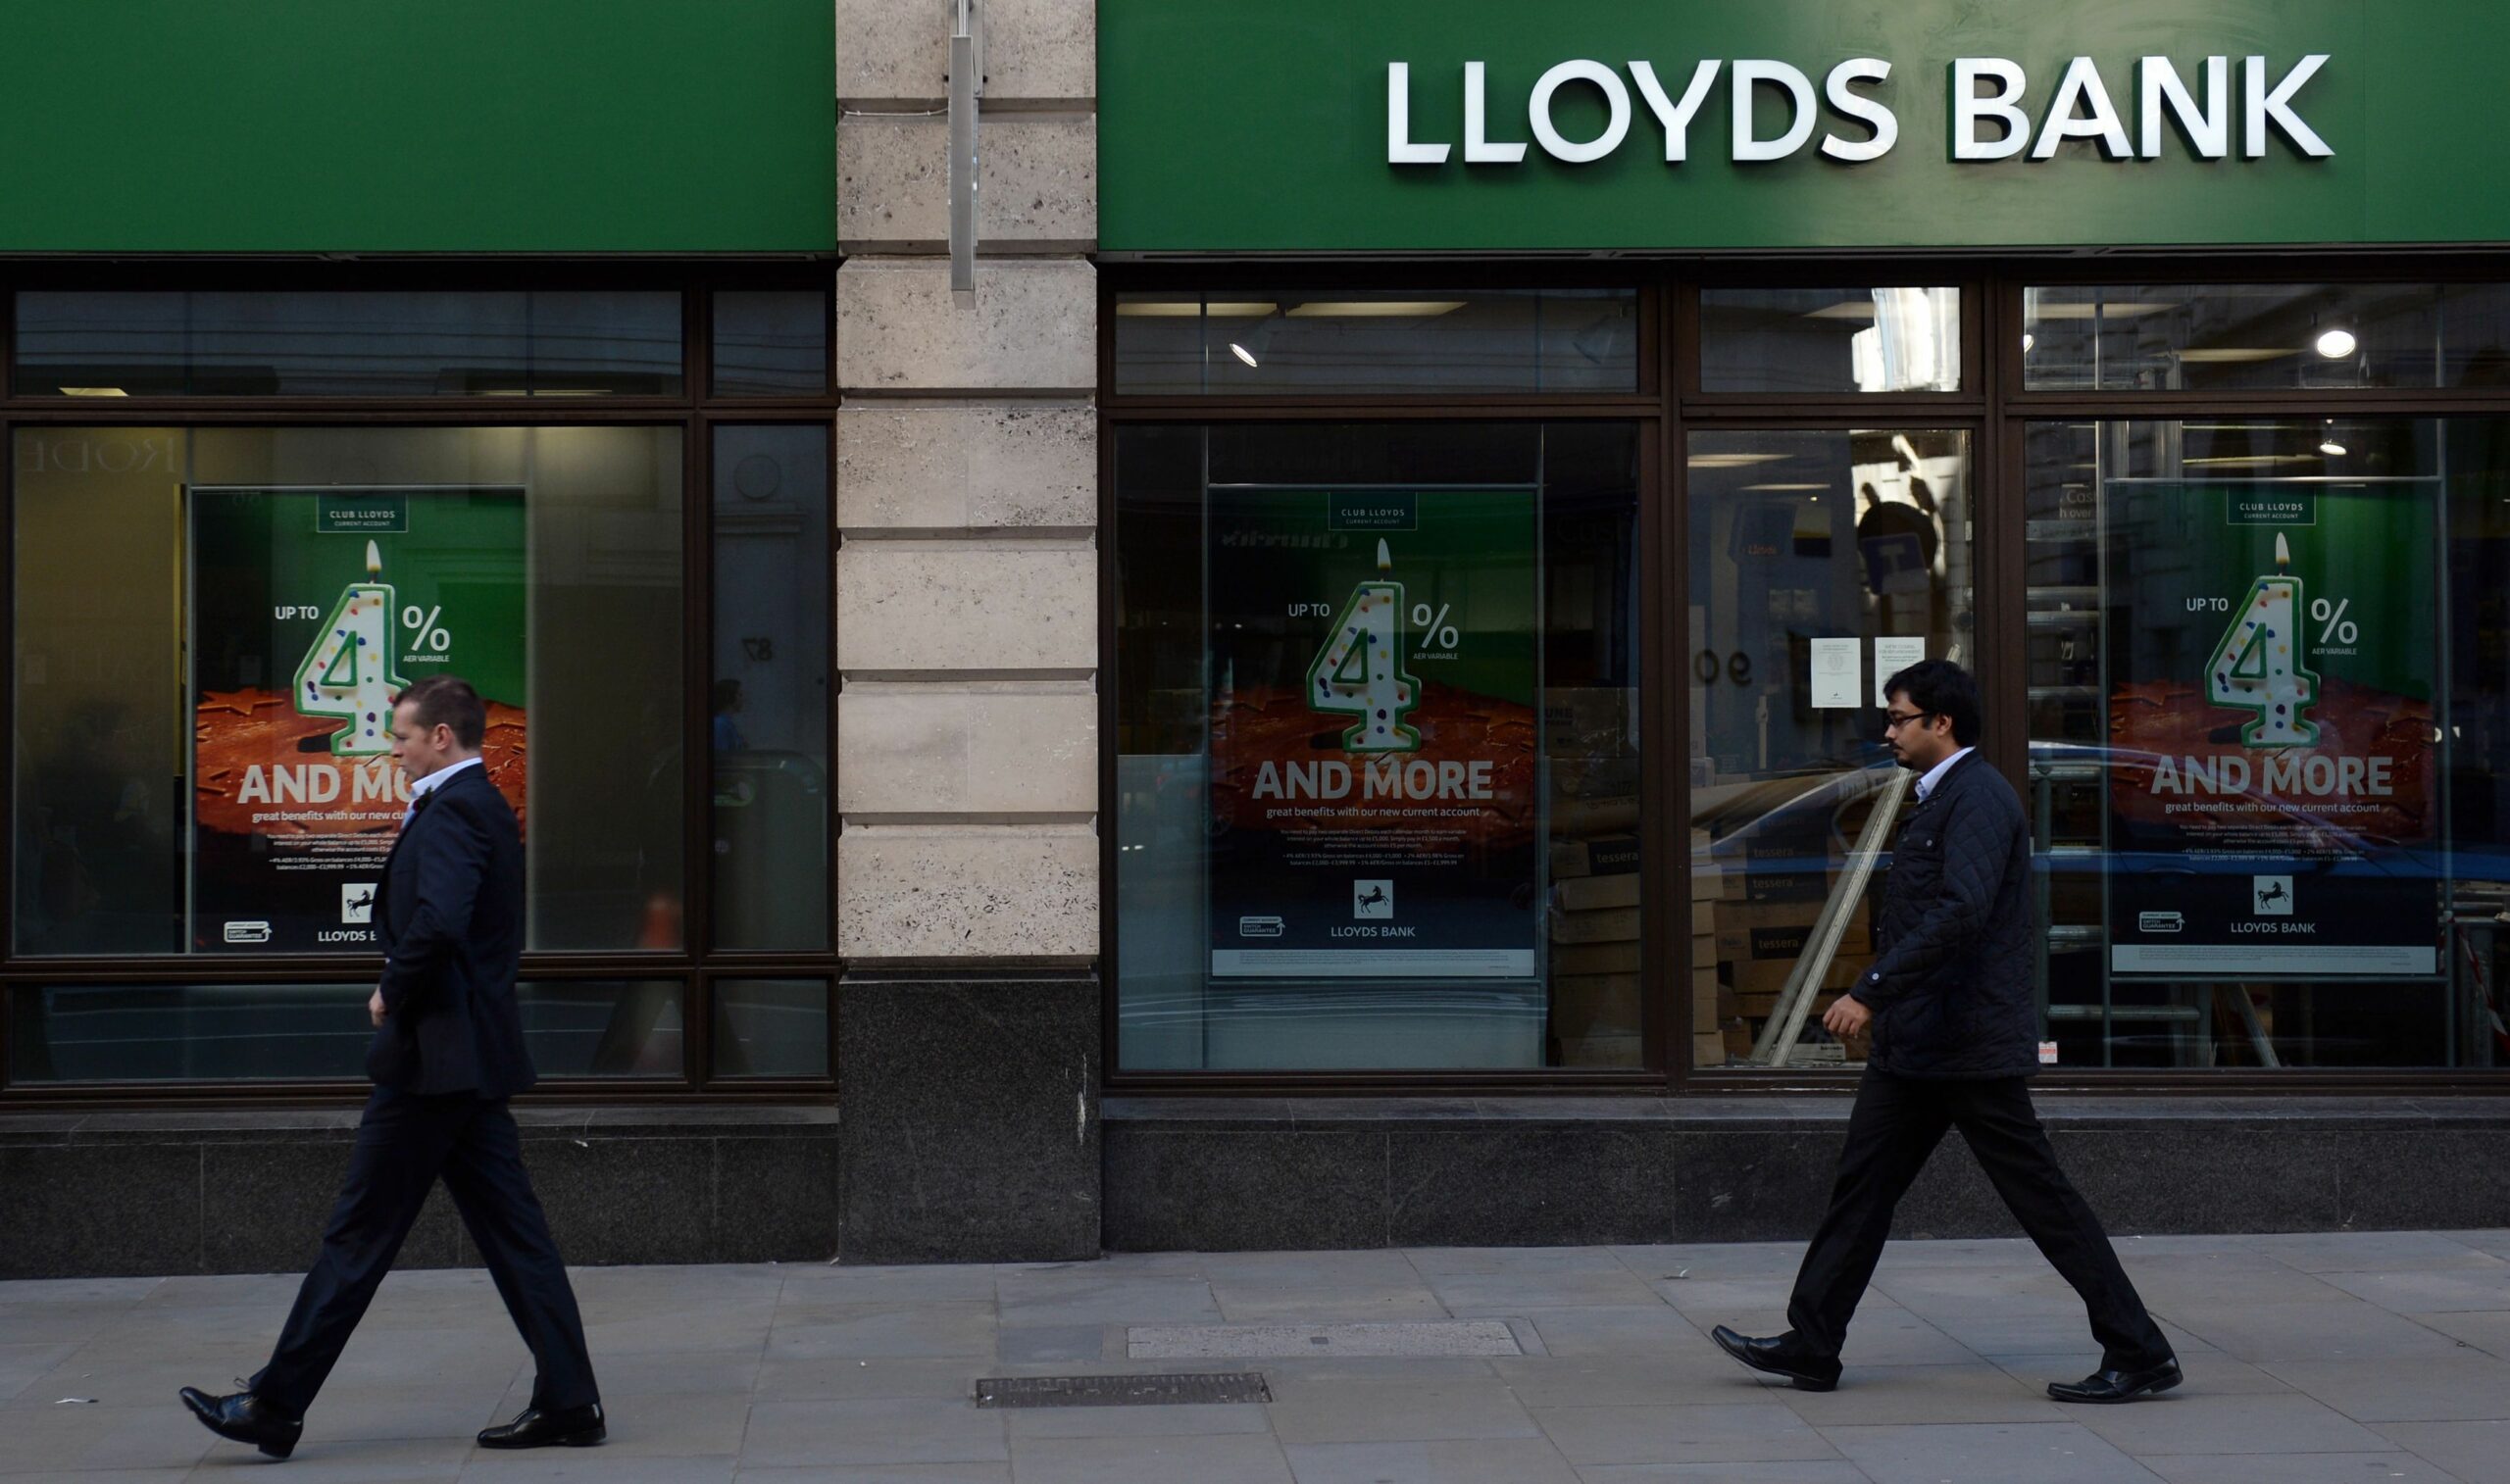 How To Cancel A Direct Debit Lloyds?